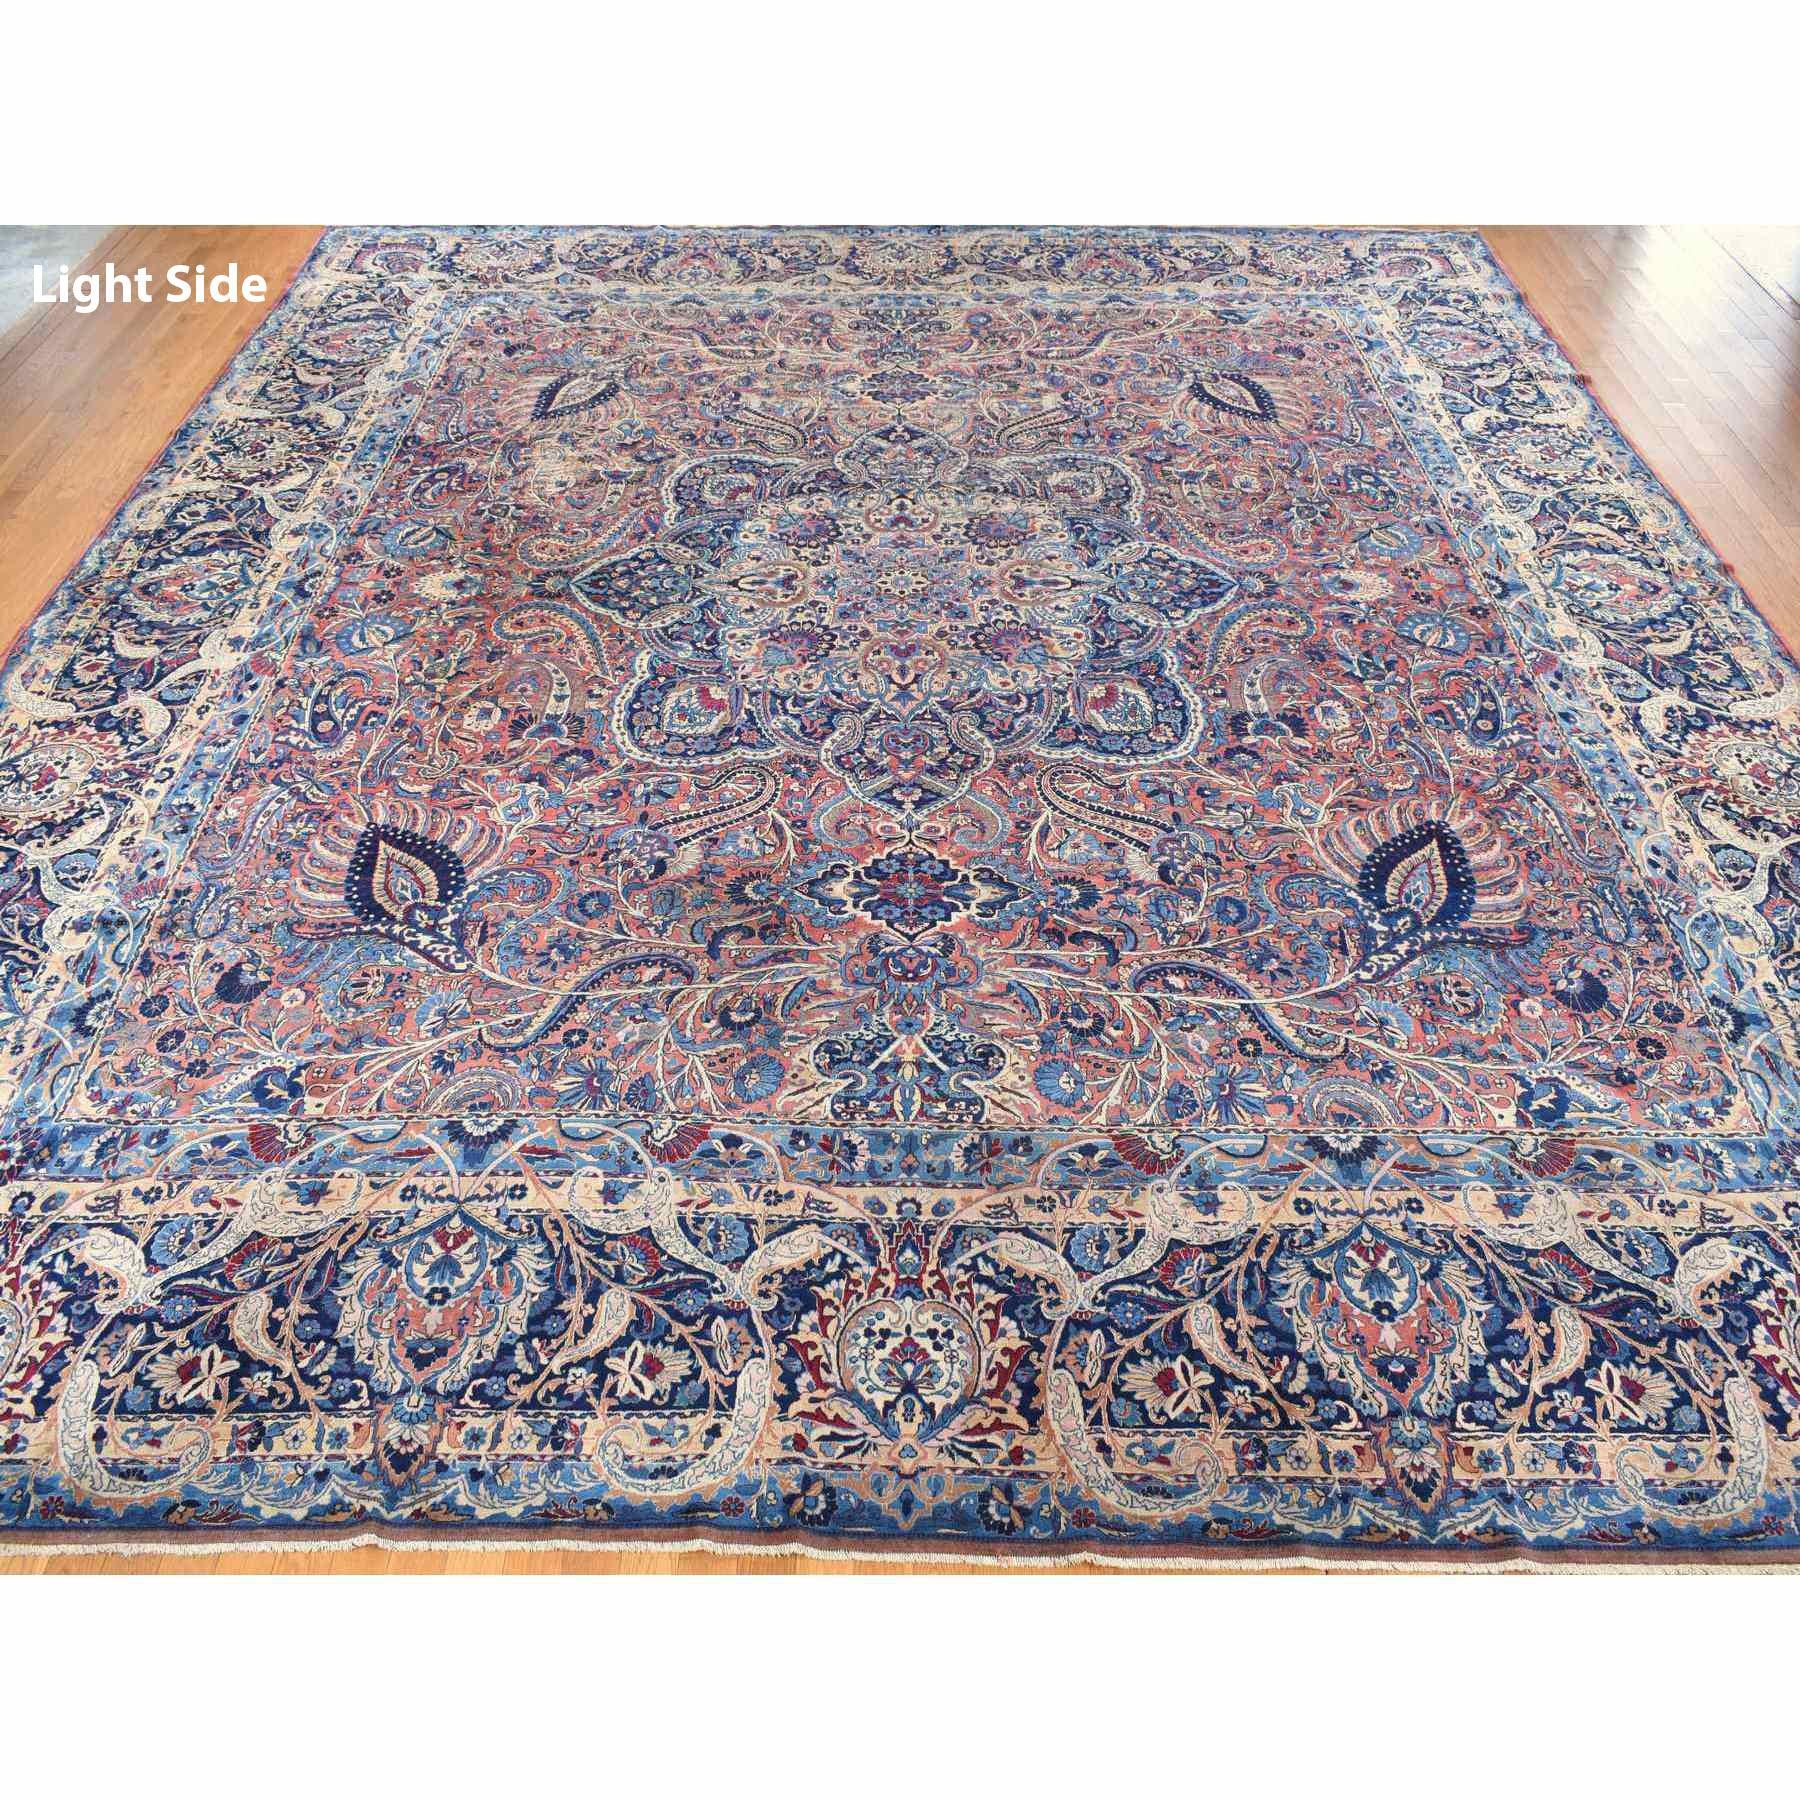 This fabulous Hand-Knotted carpet has been created and designed for extra strength and durability. This rug has been handcrafted for weeks in the traditional method that is used to make
Exact Rug Size in Feet and Inches : 14'6